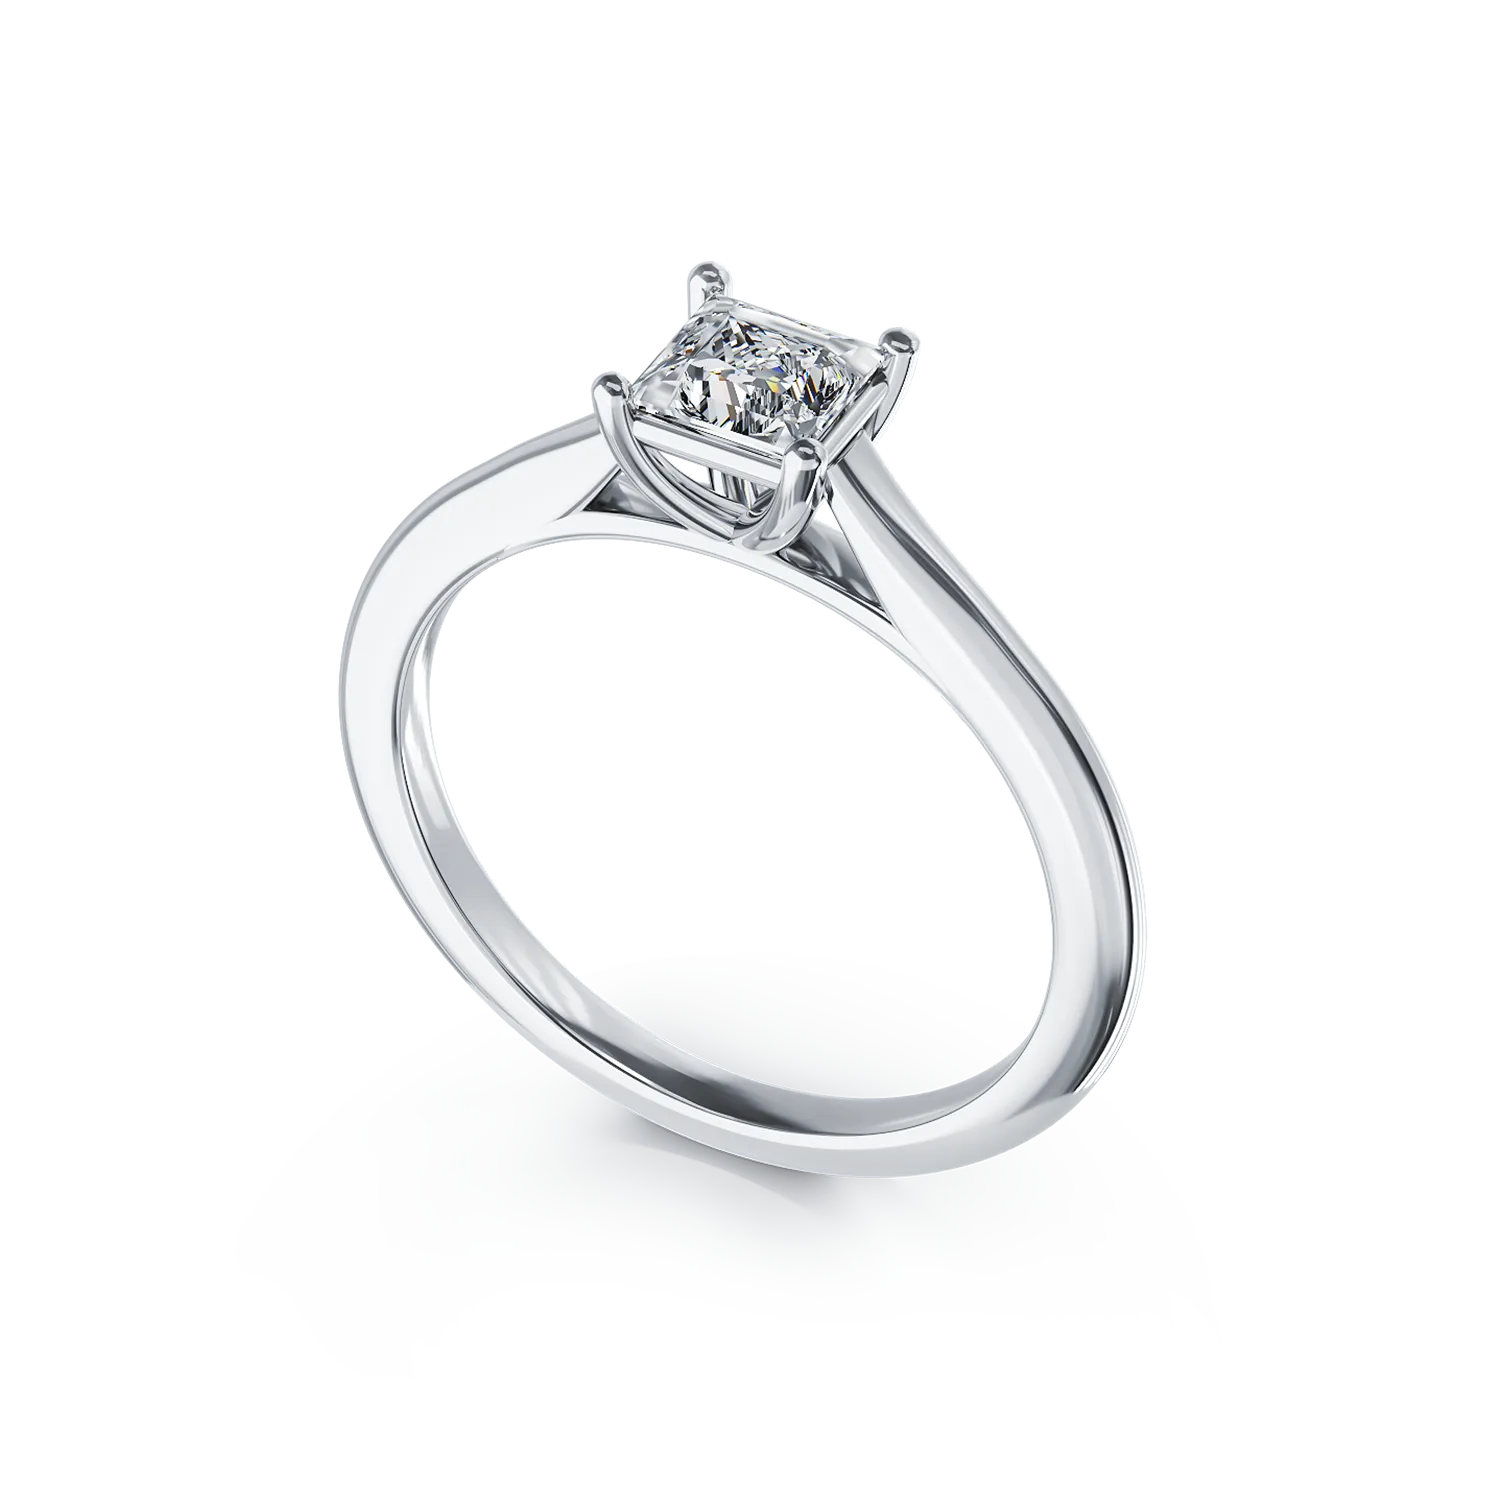 Platinum engagement ring with a 0.51ct solitaire diamond